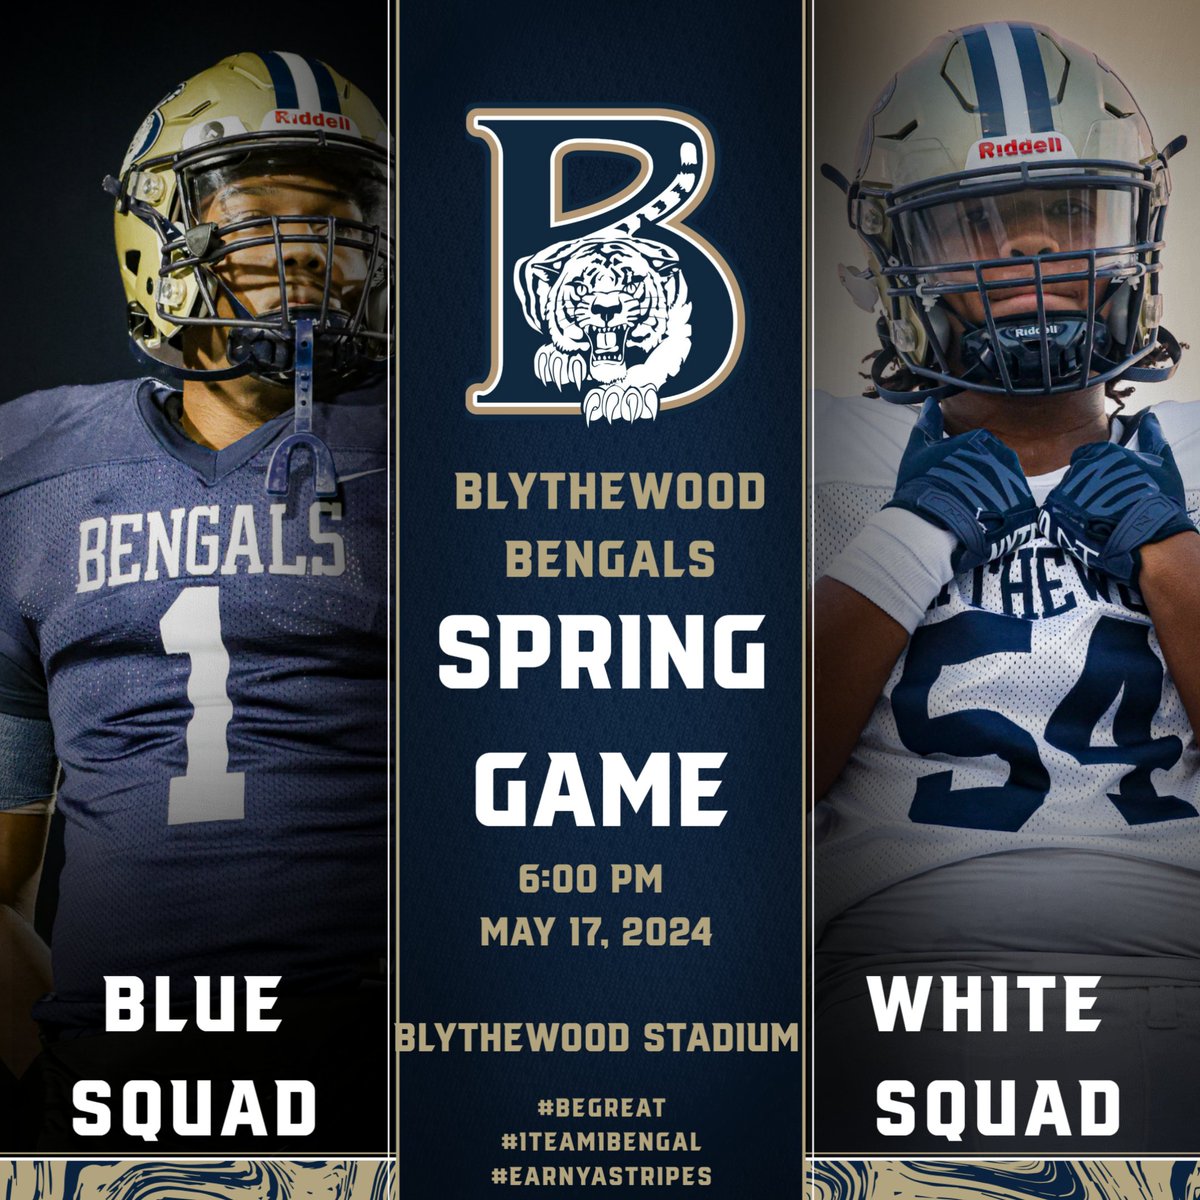 🚨🚨🚨REMINDER TONIGHT!!!!!🚨🚨🚨 ⏰️: 6:00 PM 5:30 BENGAL WALK❗️❗️❗️ 📍: @BlythewoodHigh STADIUM Food trucks and concession stand will be open tonight. Raffle tonight at halftime! #BeGreat #1Team1Bengal #EarnYaStripes